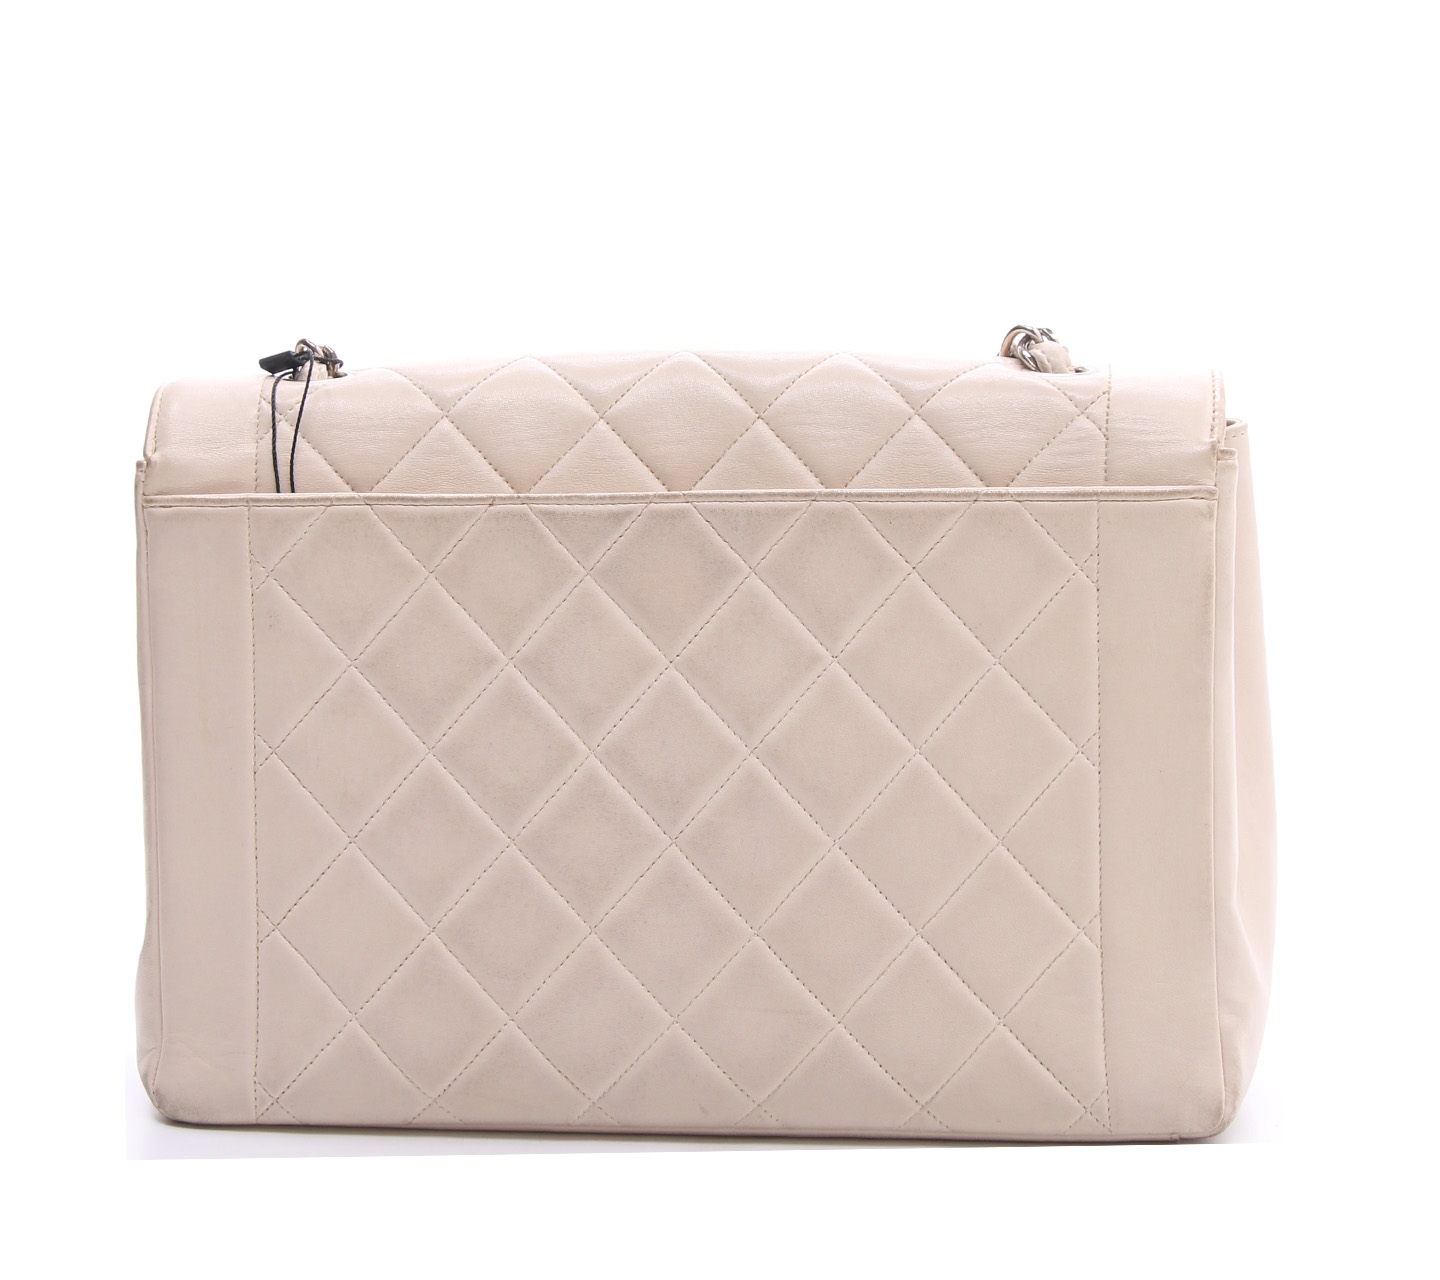 Chanel Nude Diana GHW Sling Bag